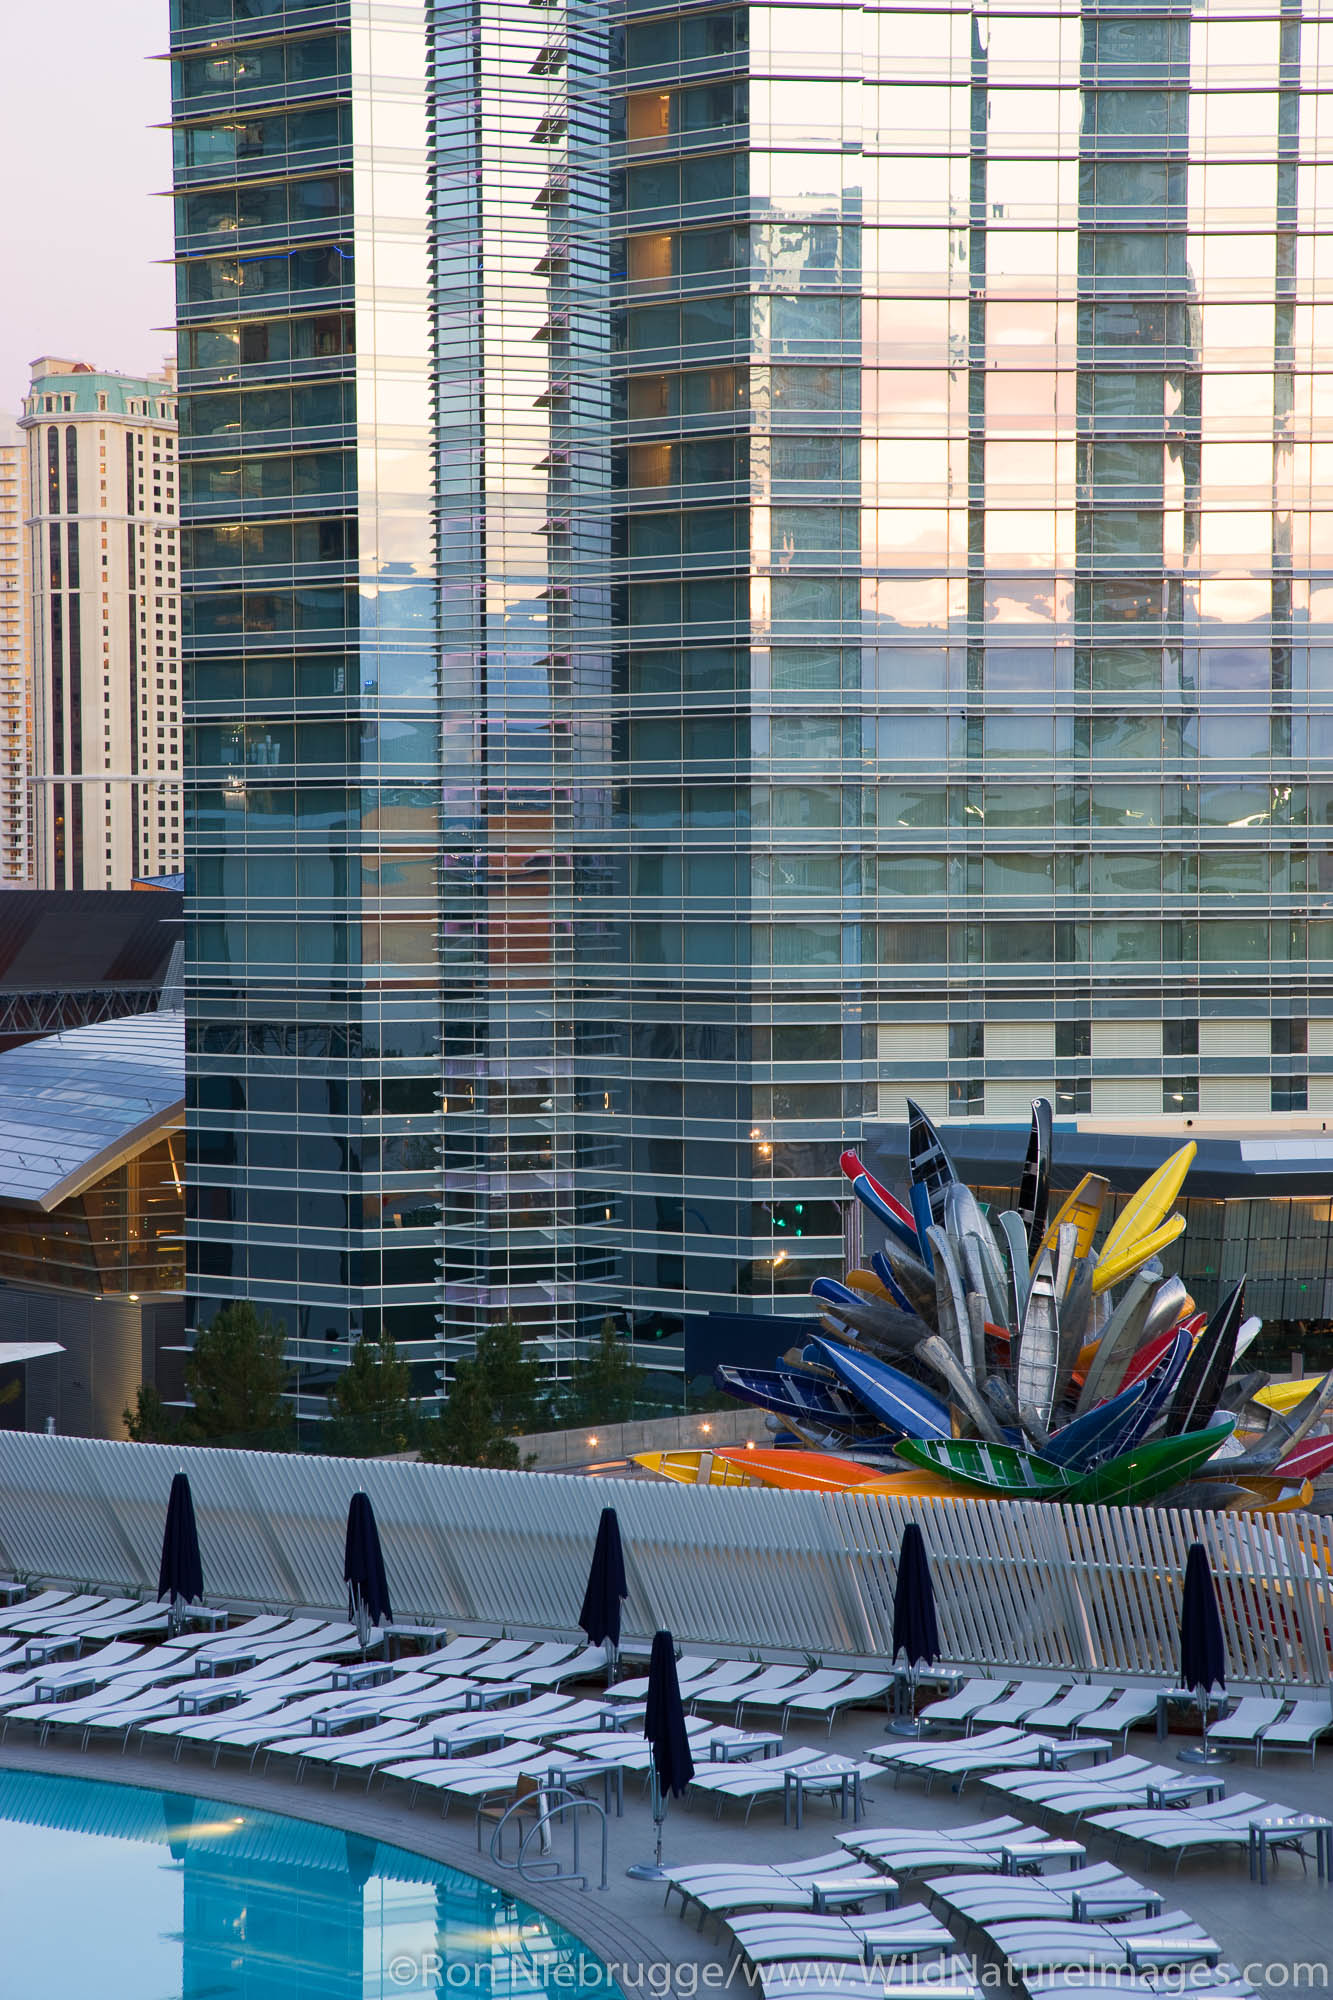 The Vdara pool with the Aria Resort and Casino in the background, City Center, Las Vegas, Nevada.